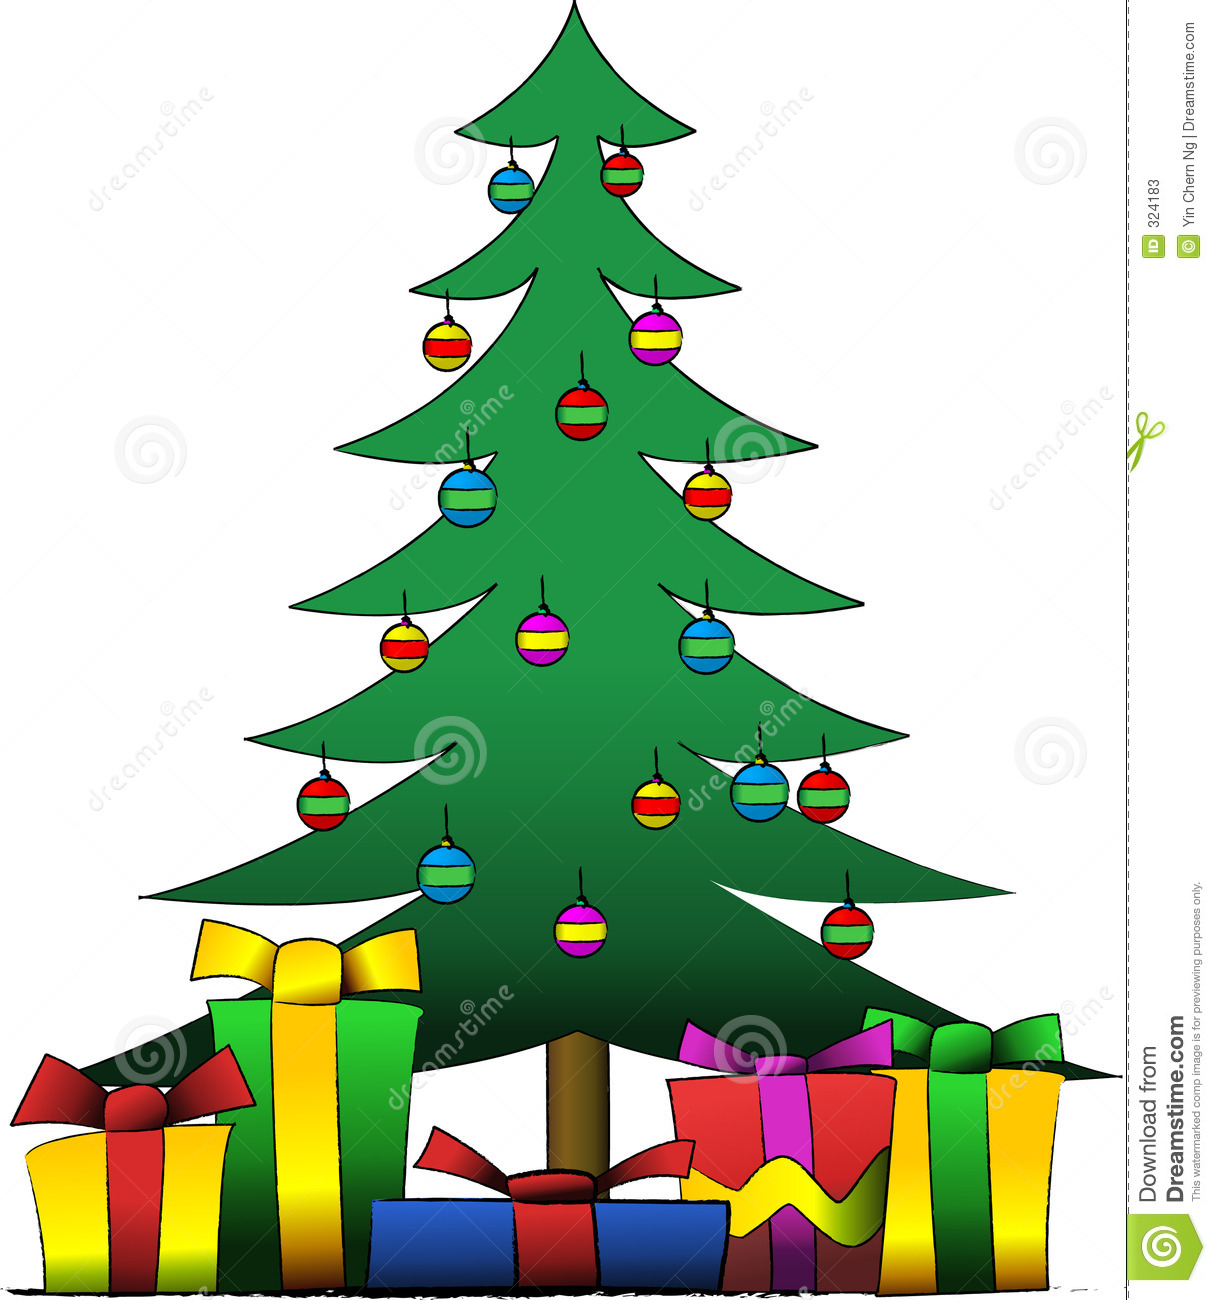 Illustration Of A Decorated Christmas Tree With Presents Under It